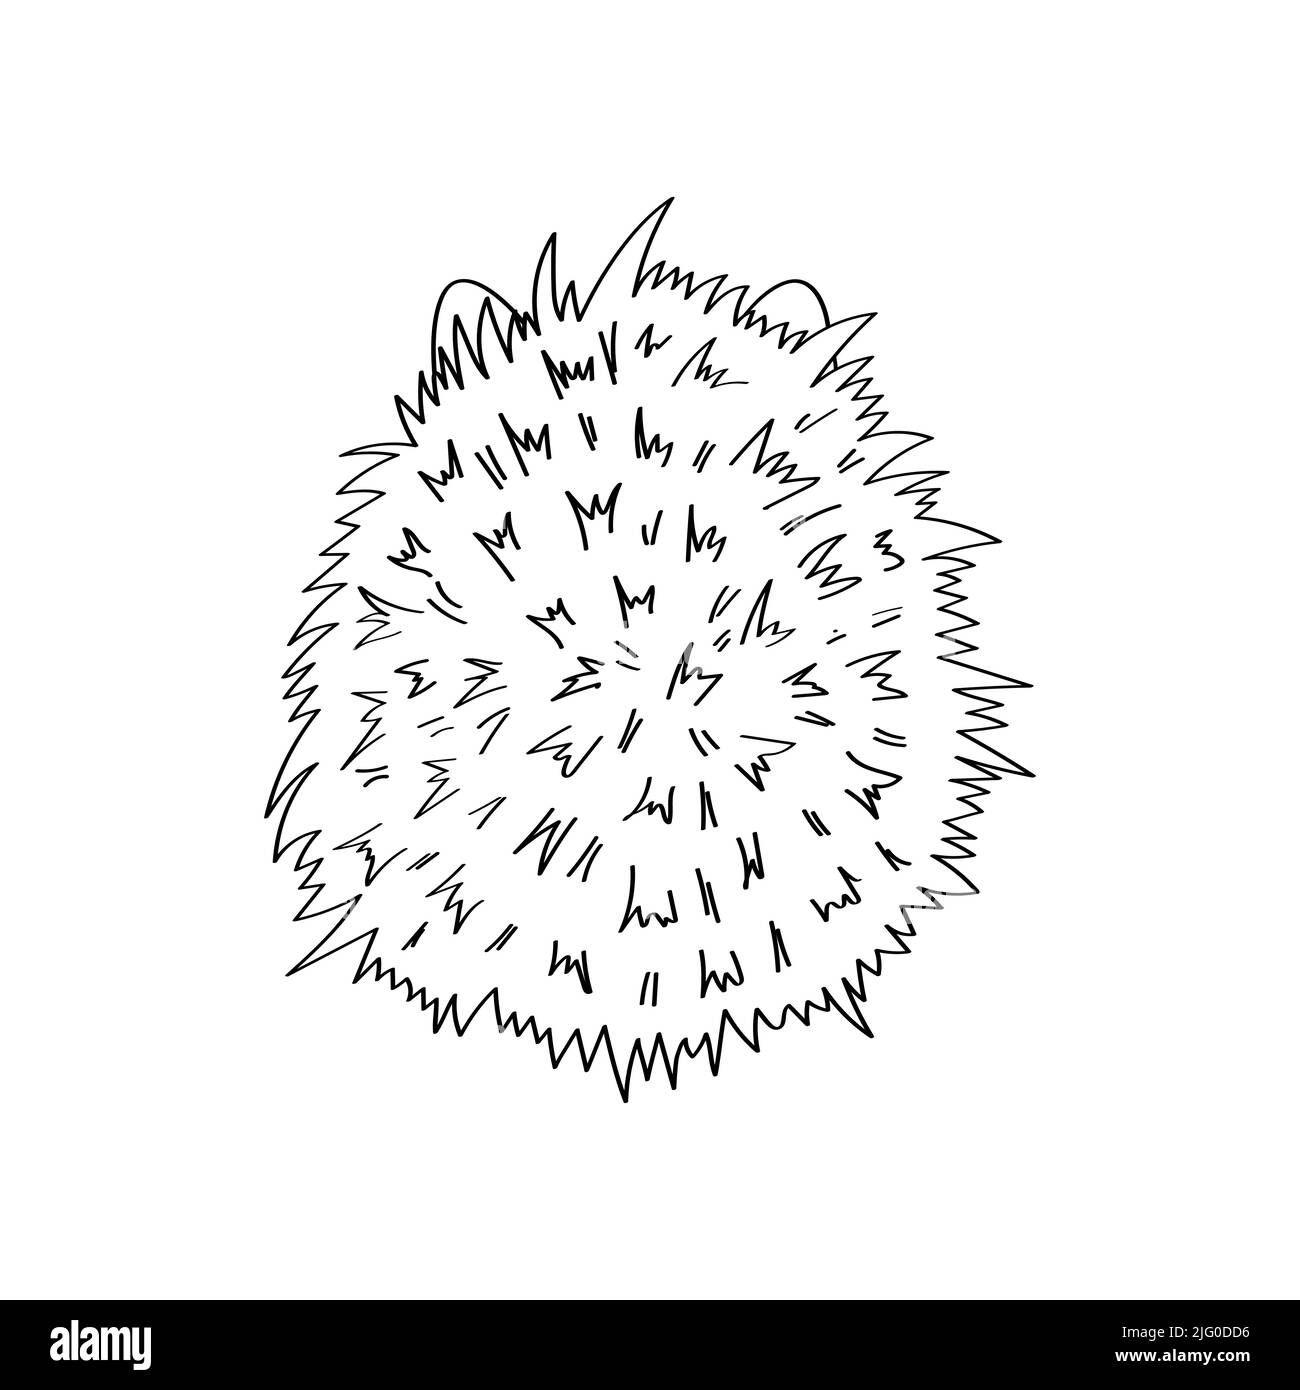 Cute Clipart Hedgehog Black and White Illustration in Cartoon Style. Cartoon Clip Art Hedgehog for Coloring Page. Vector Illustration of a Forest Stock Vector